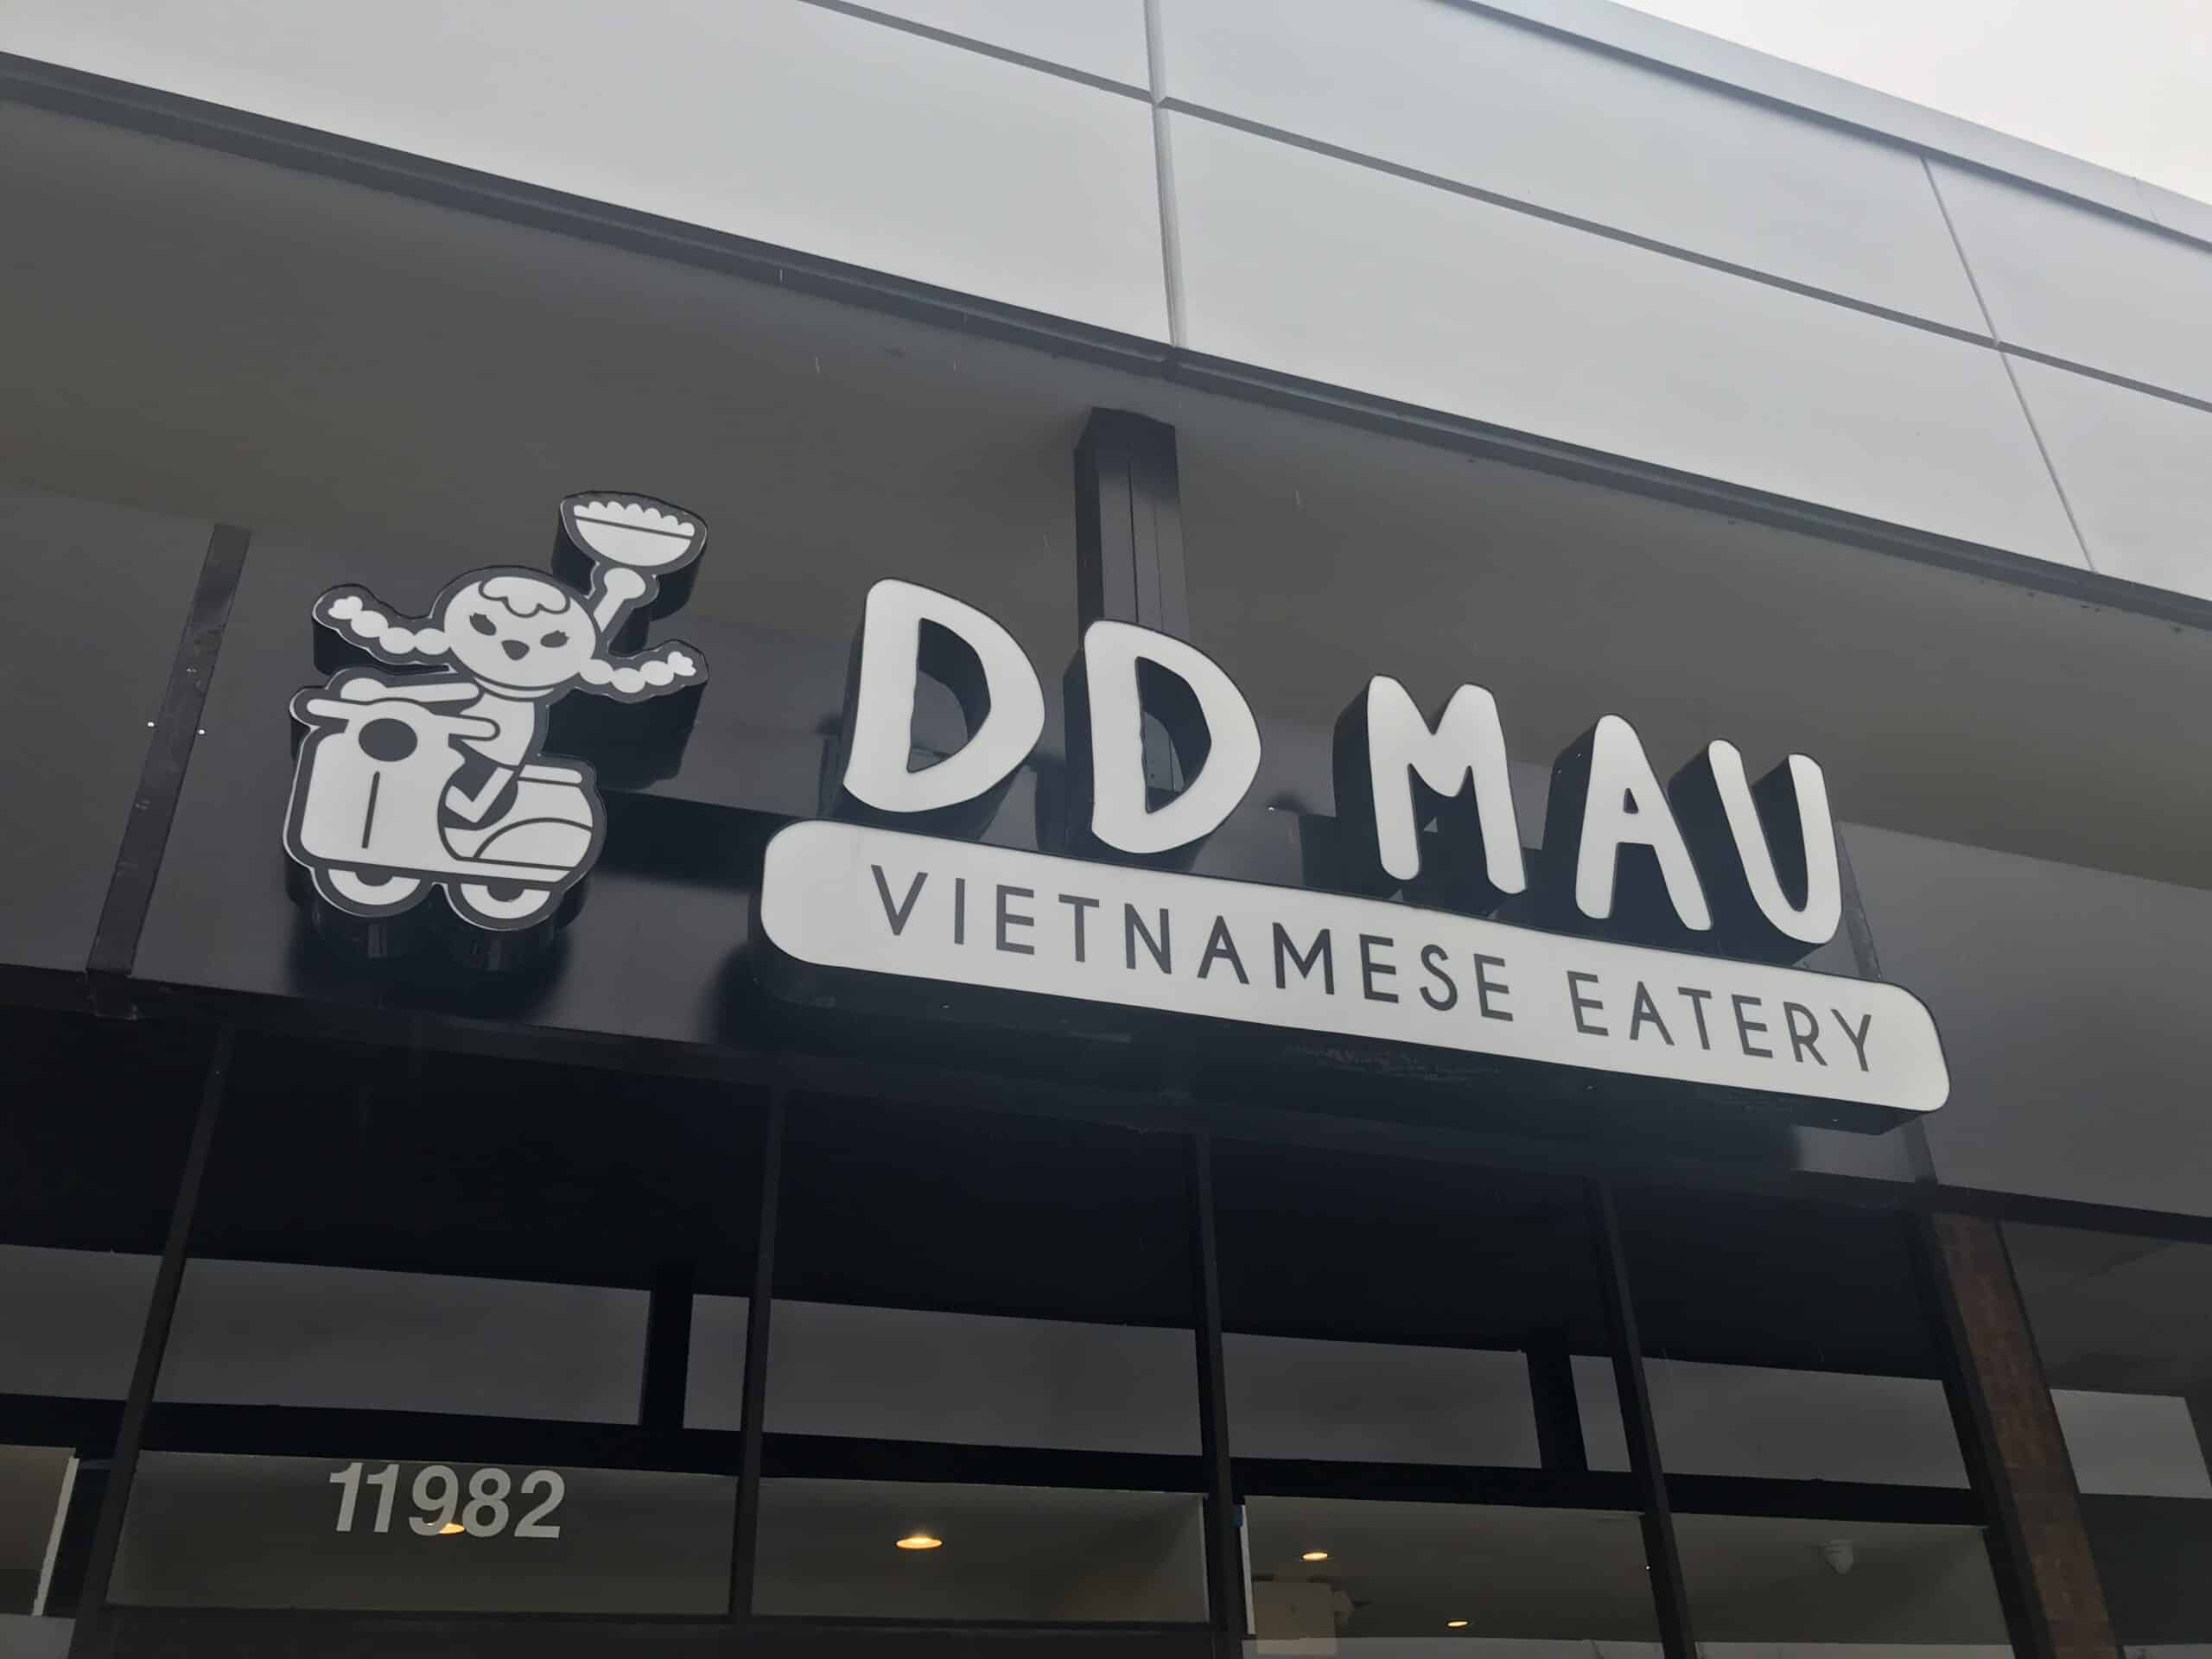 DD Mau Vietnamese Eatery added to Restaurant Directory